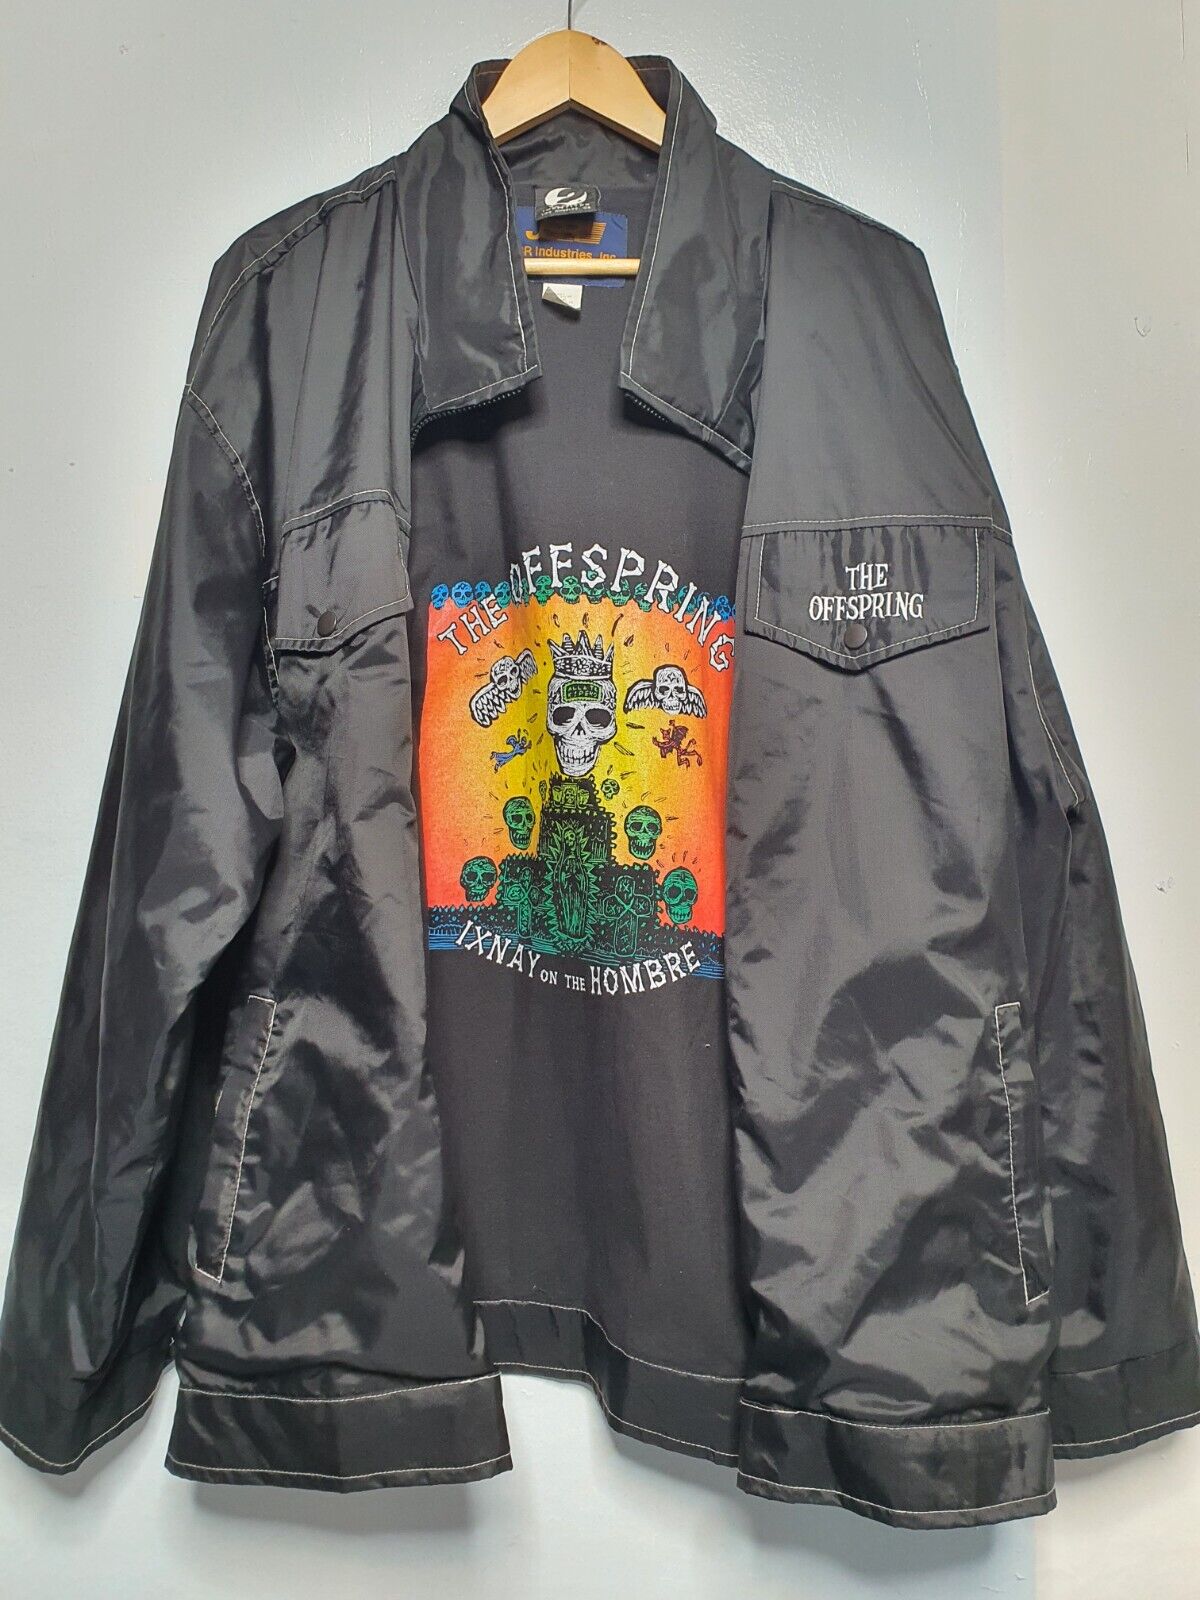 Vintage The Offspring Crew Jacket 1997 Ixnay On The Hombre Rare Mens Extra Large